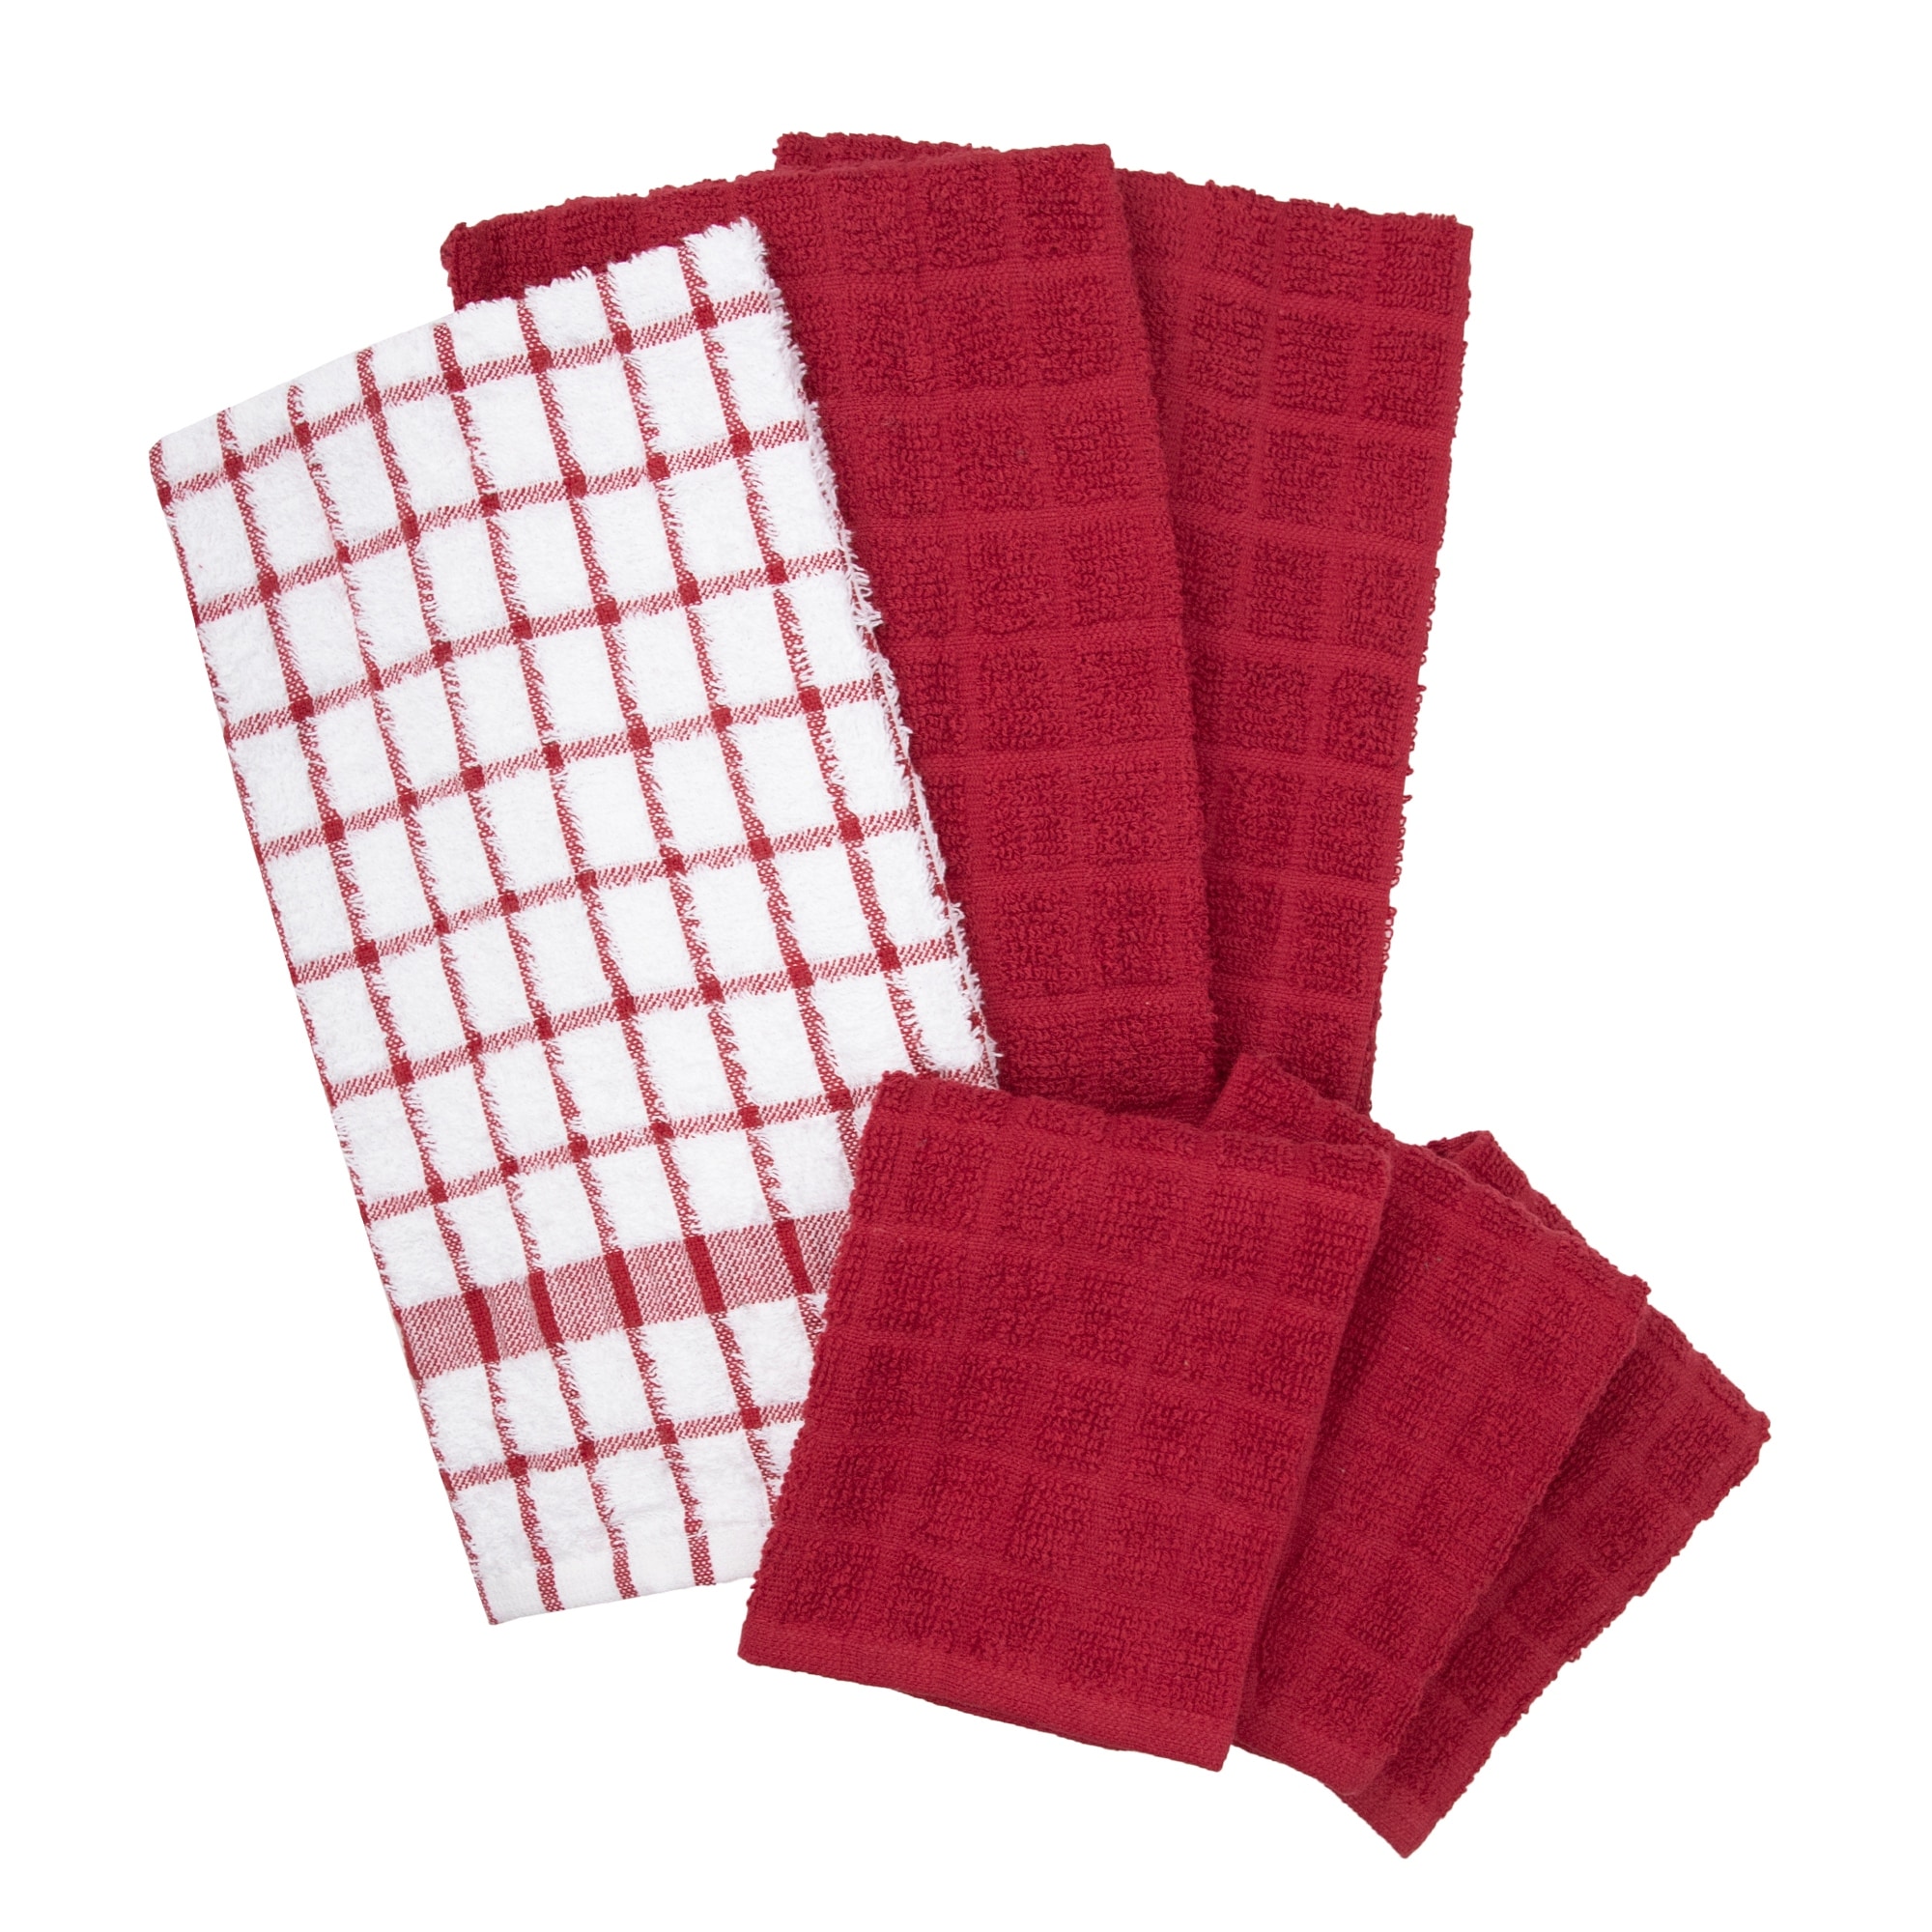 https://ak1.ostkcdn.com/images/products/is/images/direct/38686a5c53b544b501097711b7d9cb87892a5517/RITZ-Terry-Kitchen-Towel-and-Dish-Cloth%2C-Set-of-3-Towels-and-3-Dish-Cloths.jpg